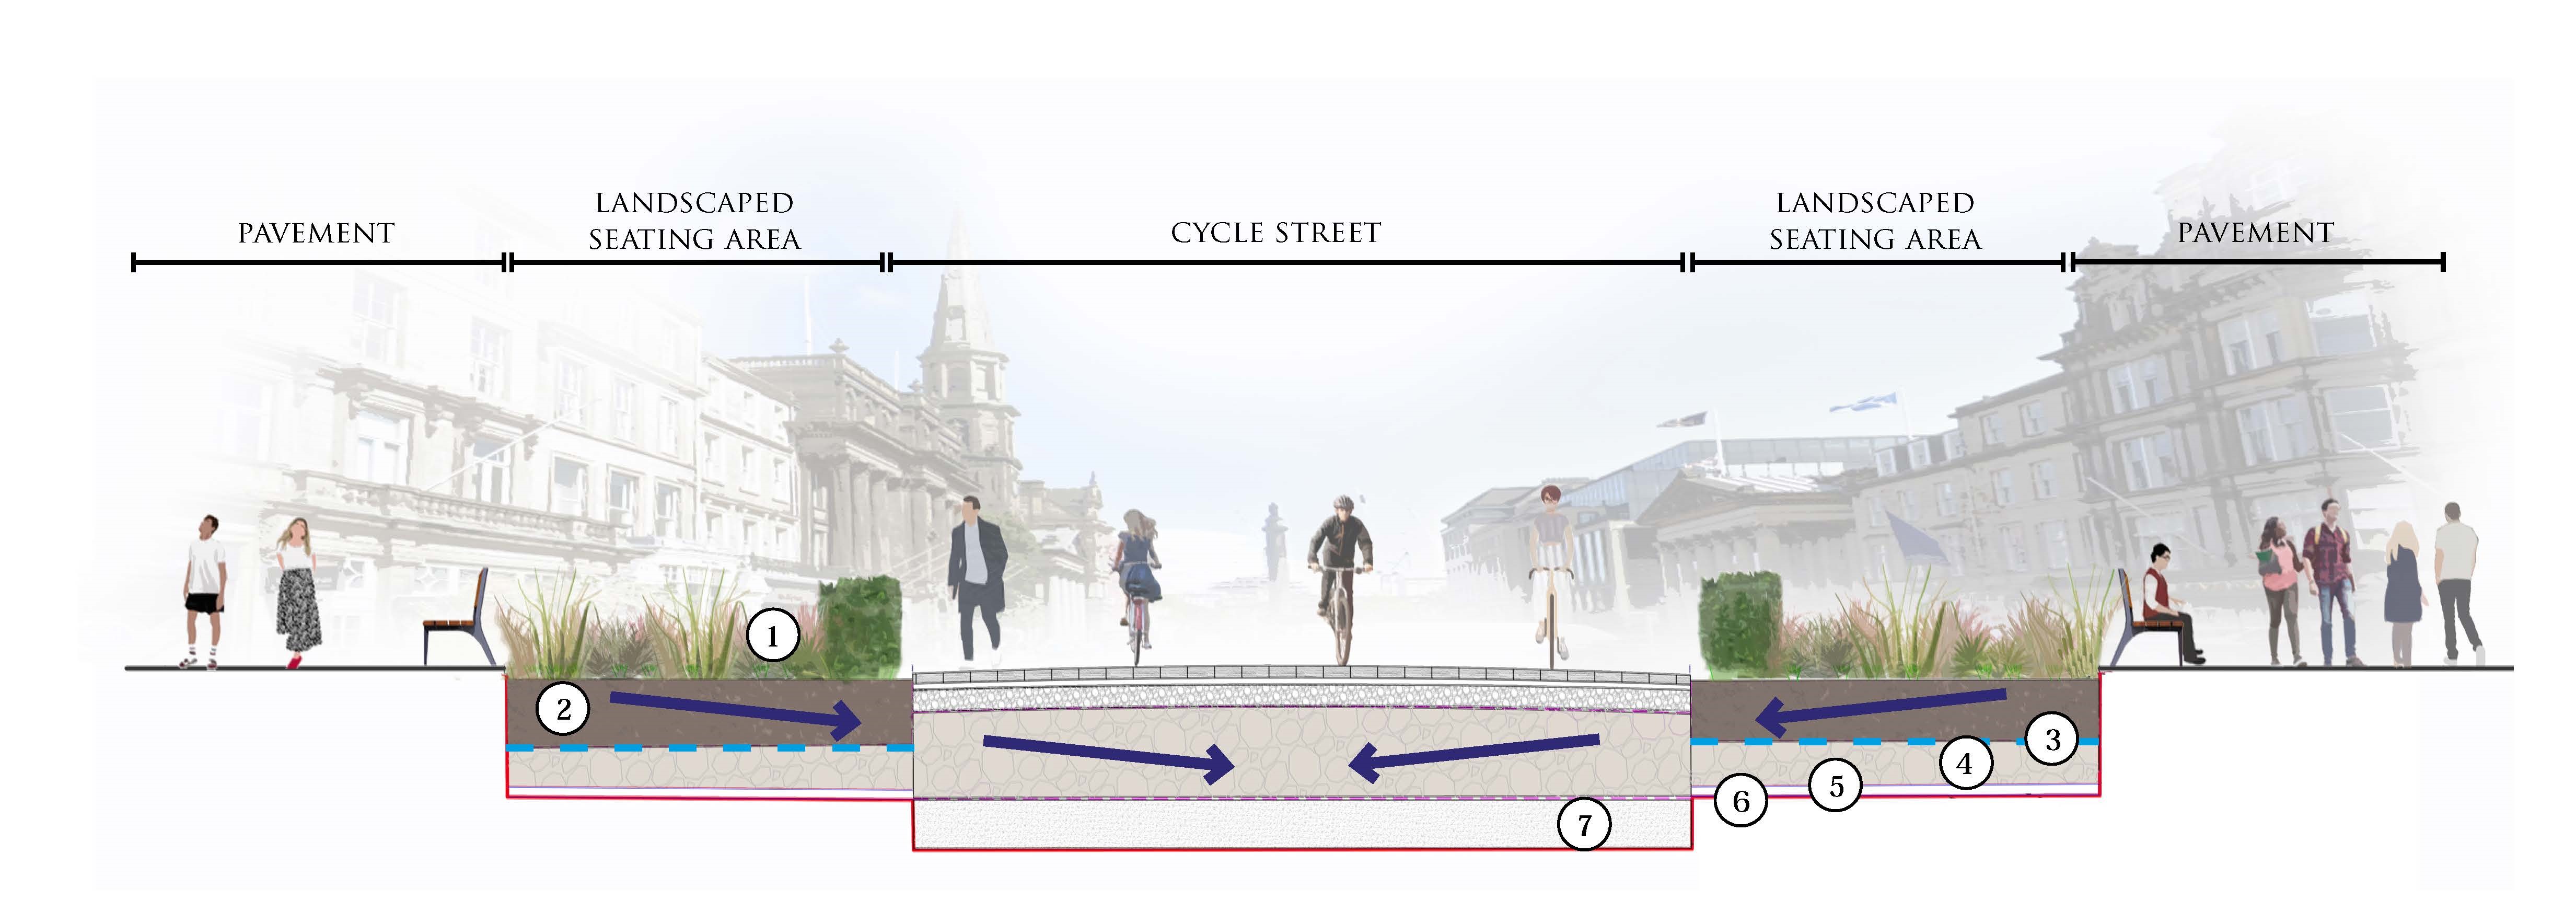 Cross section of George Street. Pavement to the far left and right, Landscaped seating area second to left and right, Cycle street through the middle.